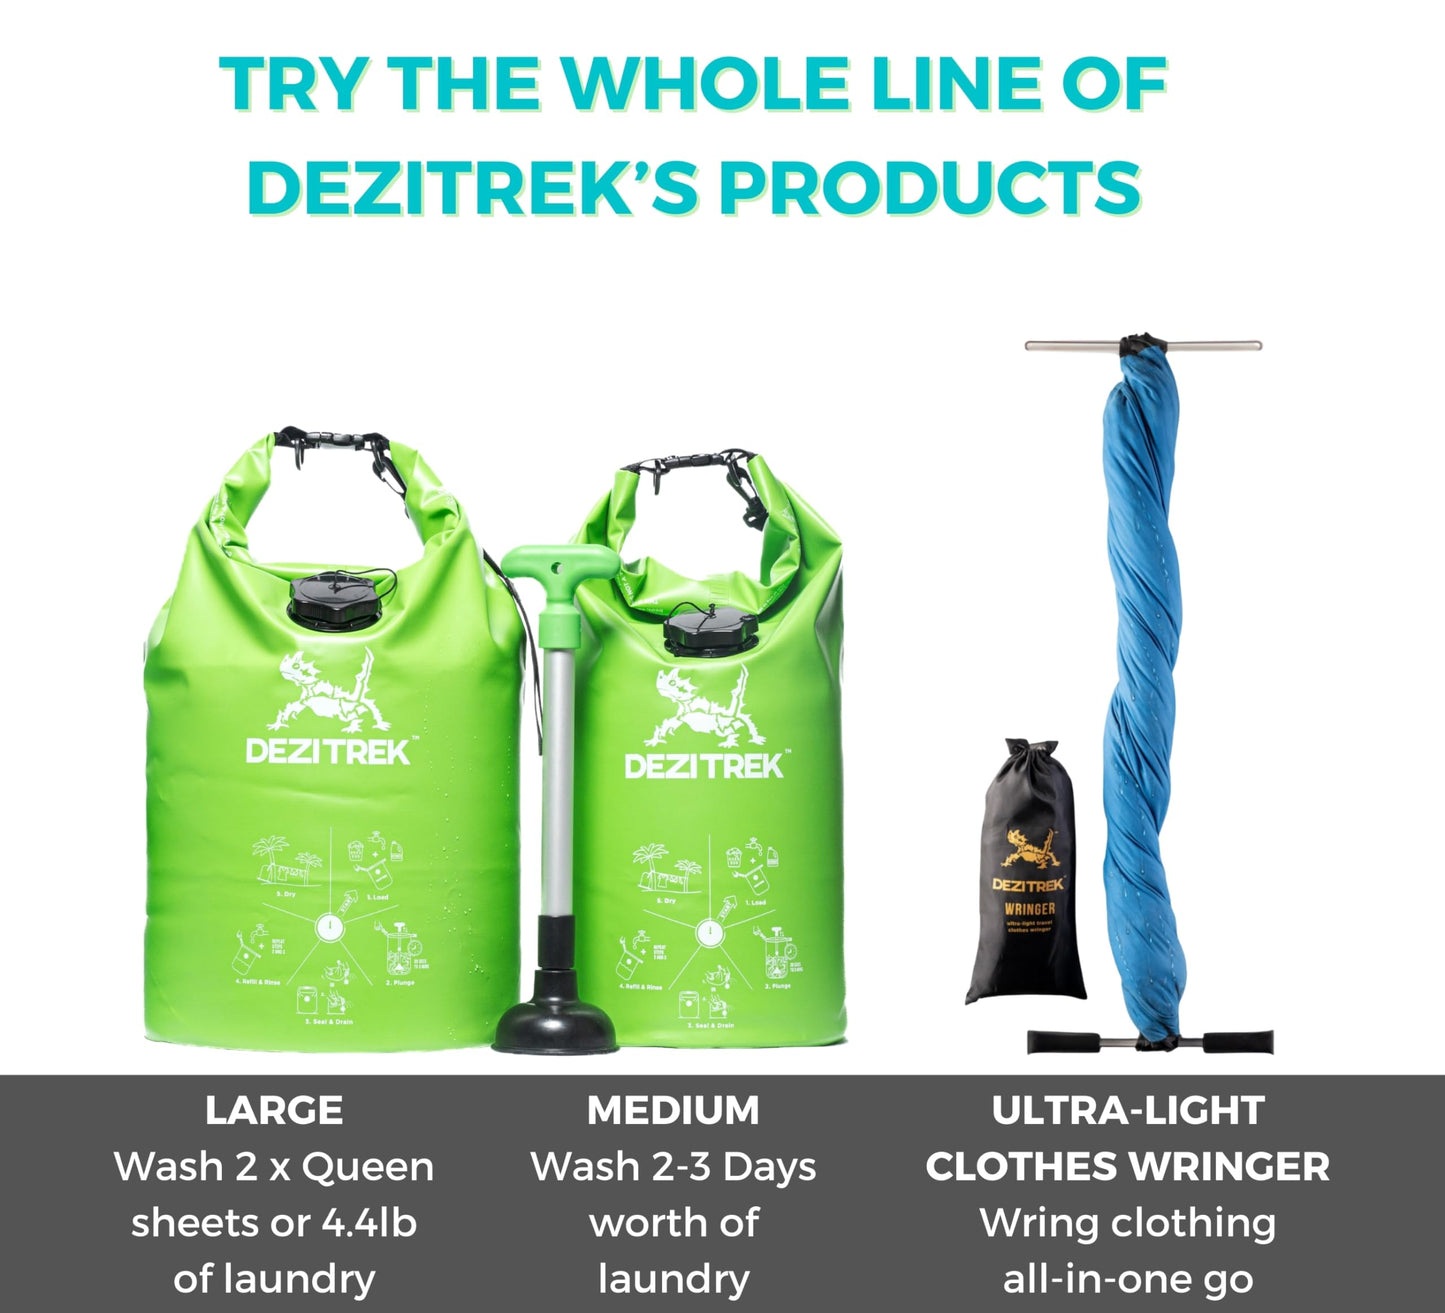 Dezitrek LARGE All in One Hand Wash Bag and Plunger Set - Off Grid Washing Machine Non Electric for Camping Travel | Eco Friendly Portable Manual Clothes Washer Laundry Bag for RV's, Apartments